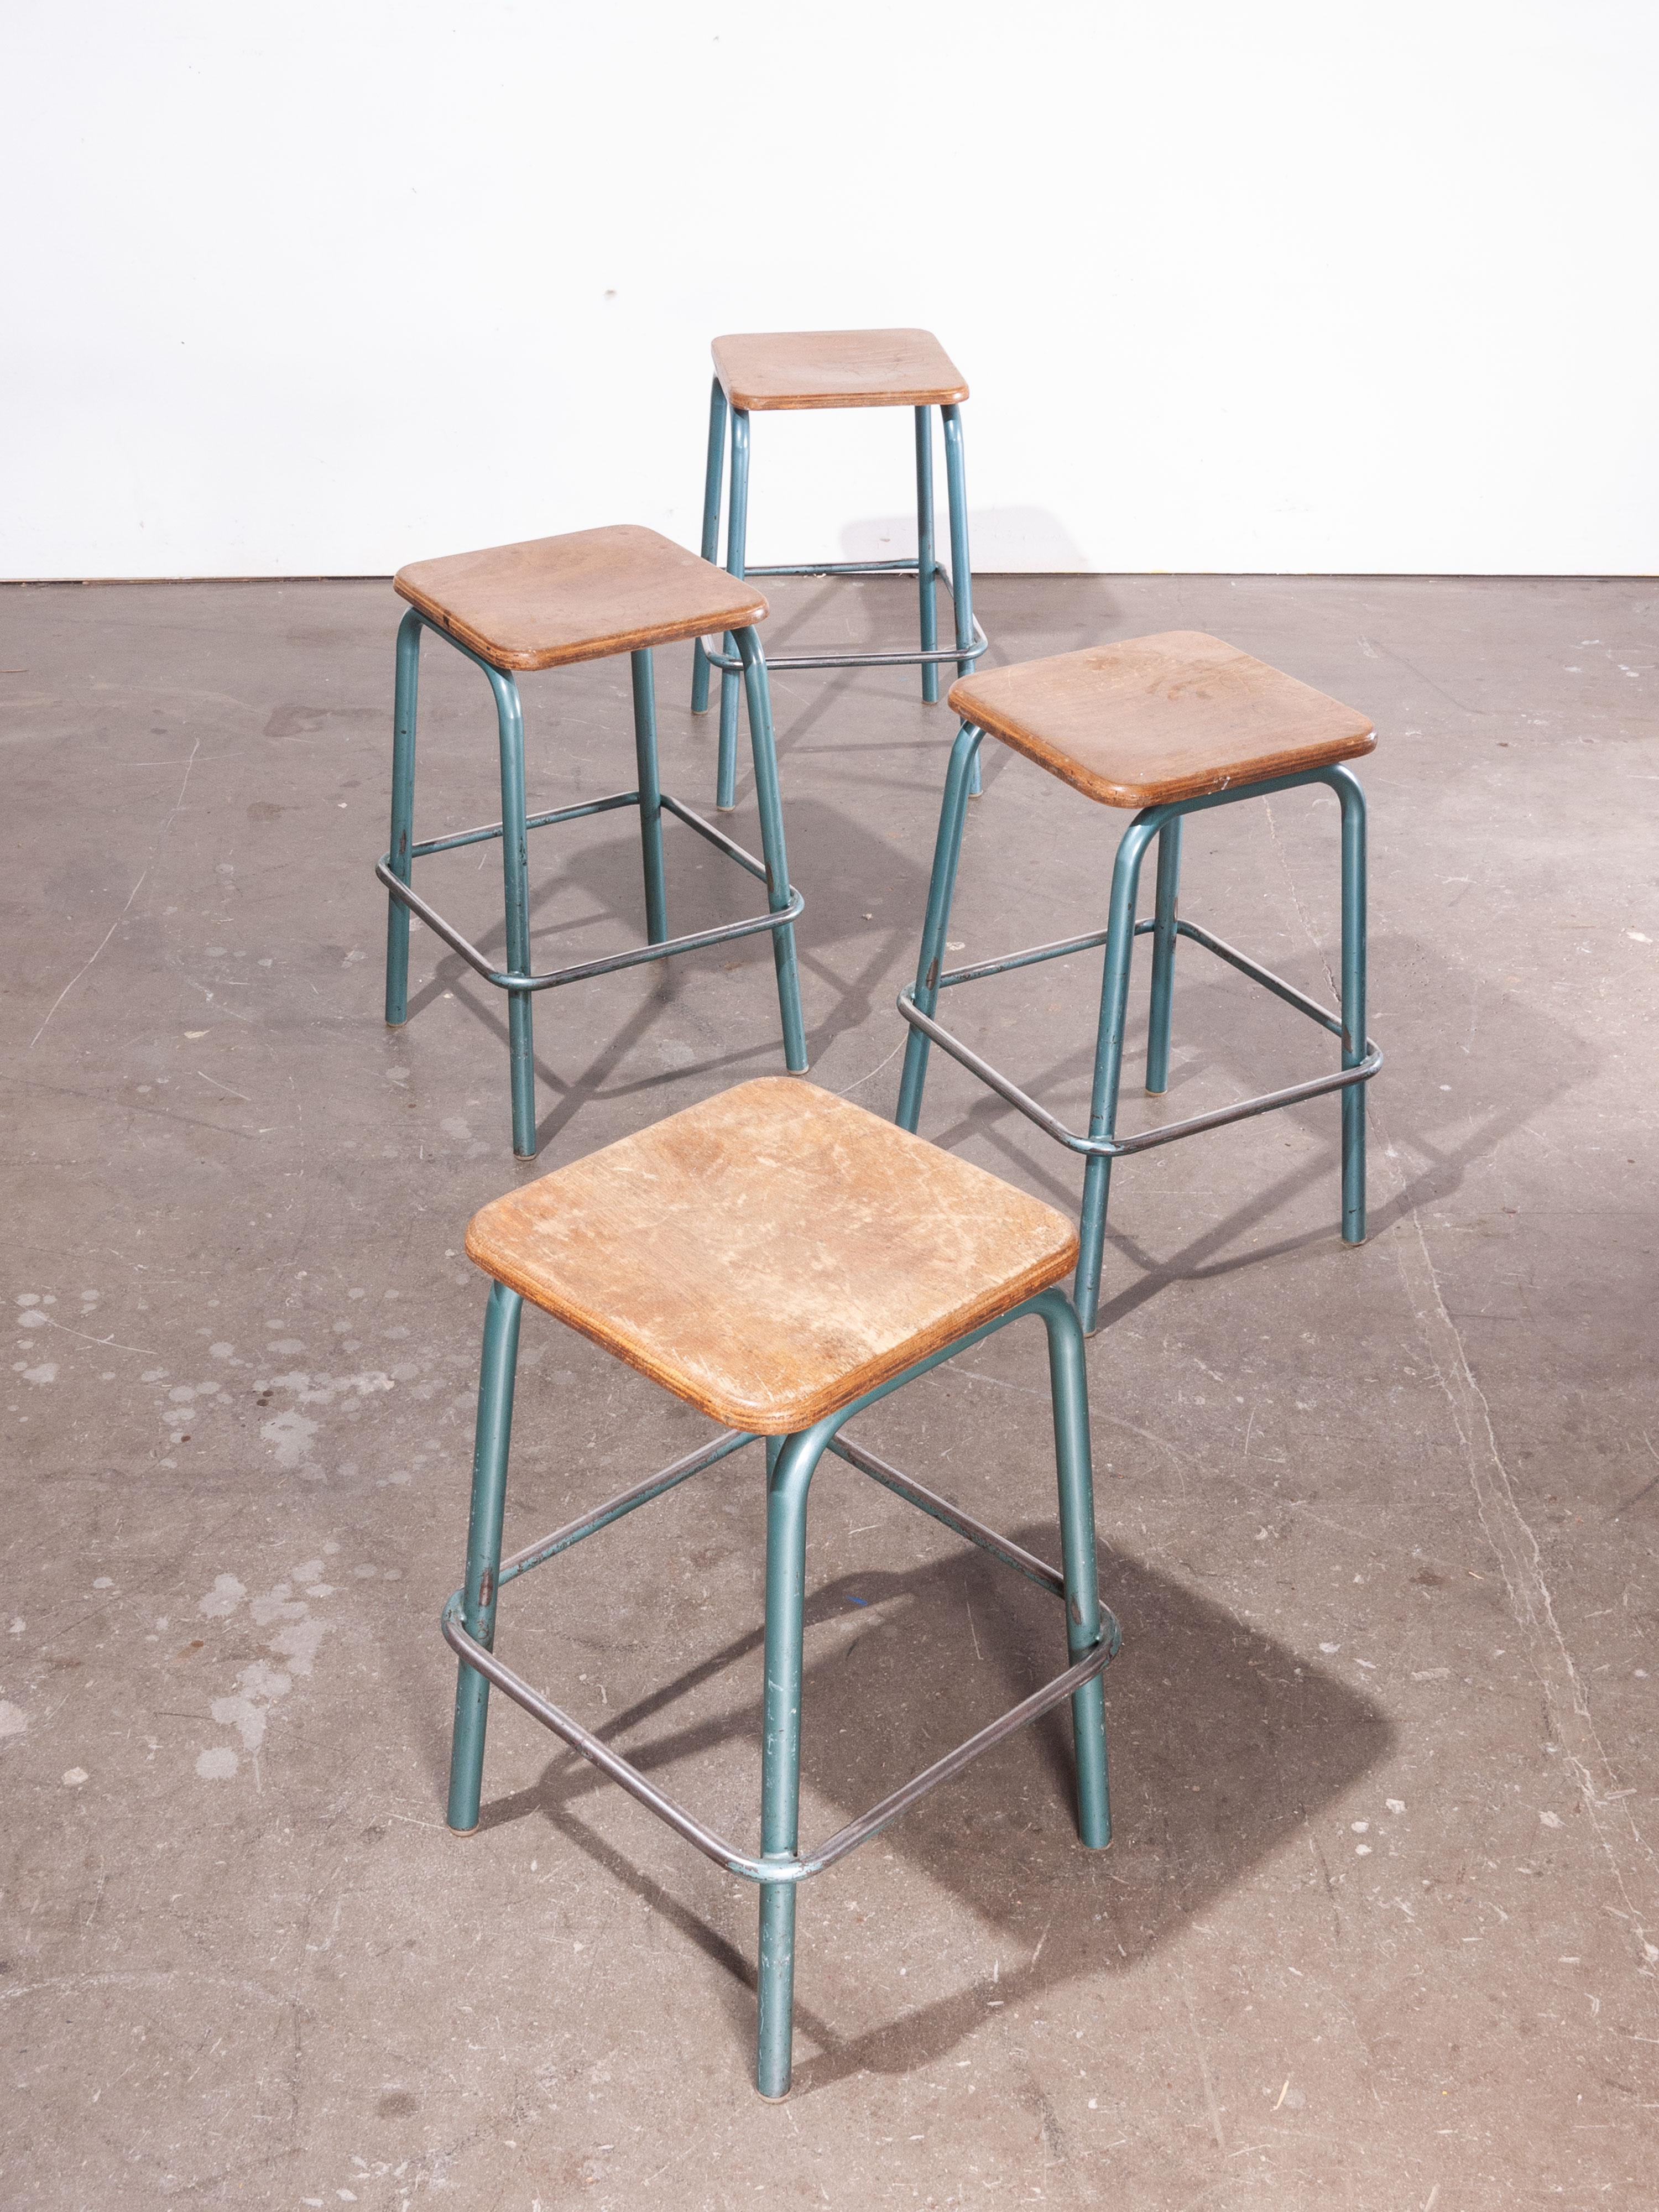 1950s Mullca industrial French stacking high stools, set of four, other quantities available.
1950s vintage Mullca industrial French stacking high stools, set of four, other quantities available. We are huge fans of the French company Mullca and